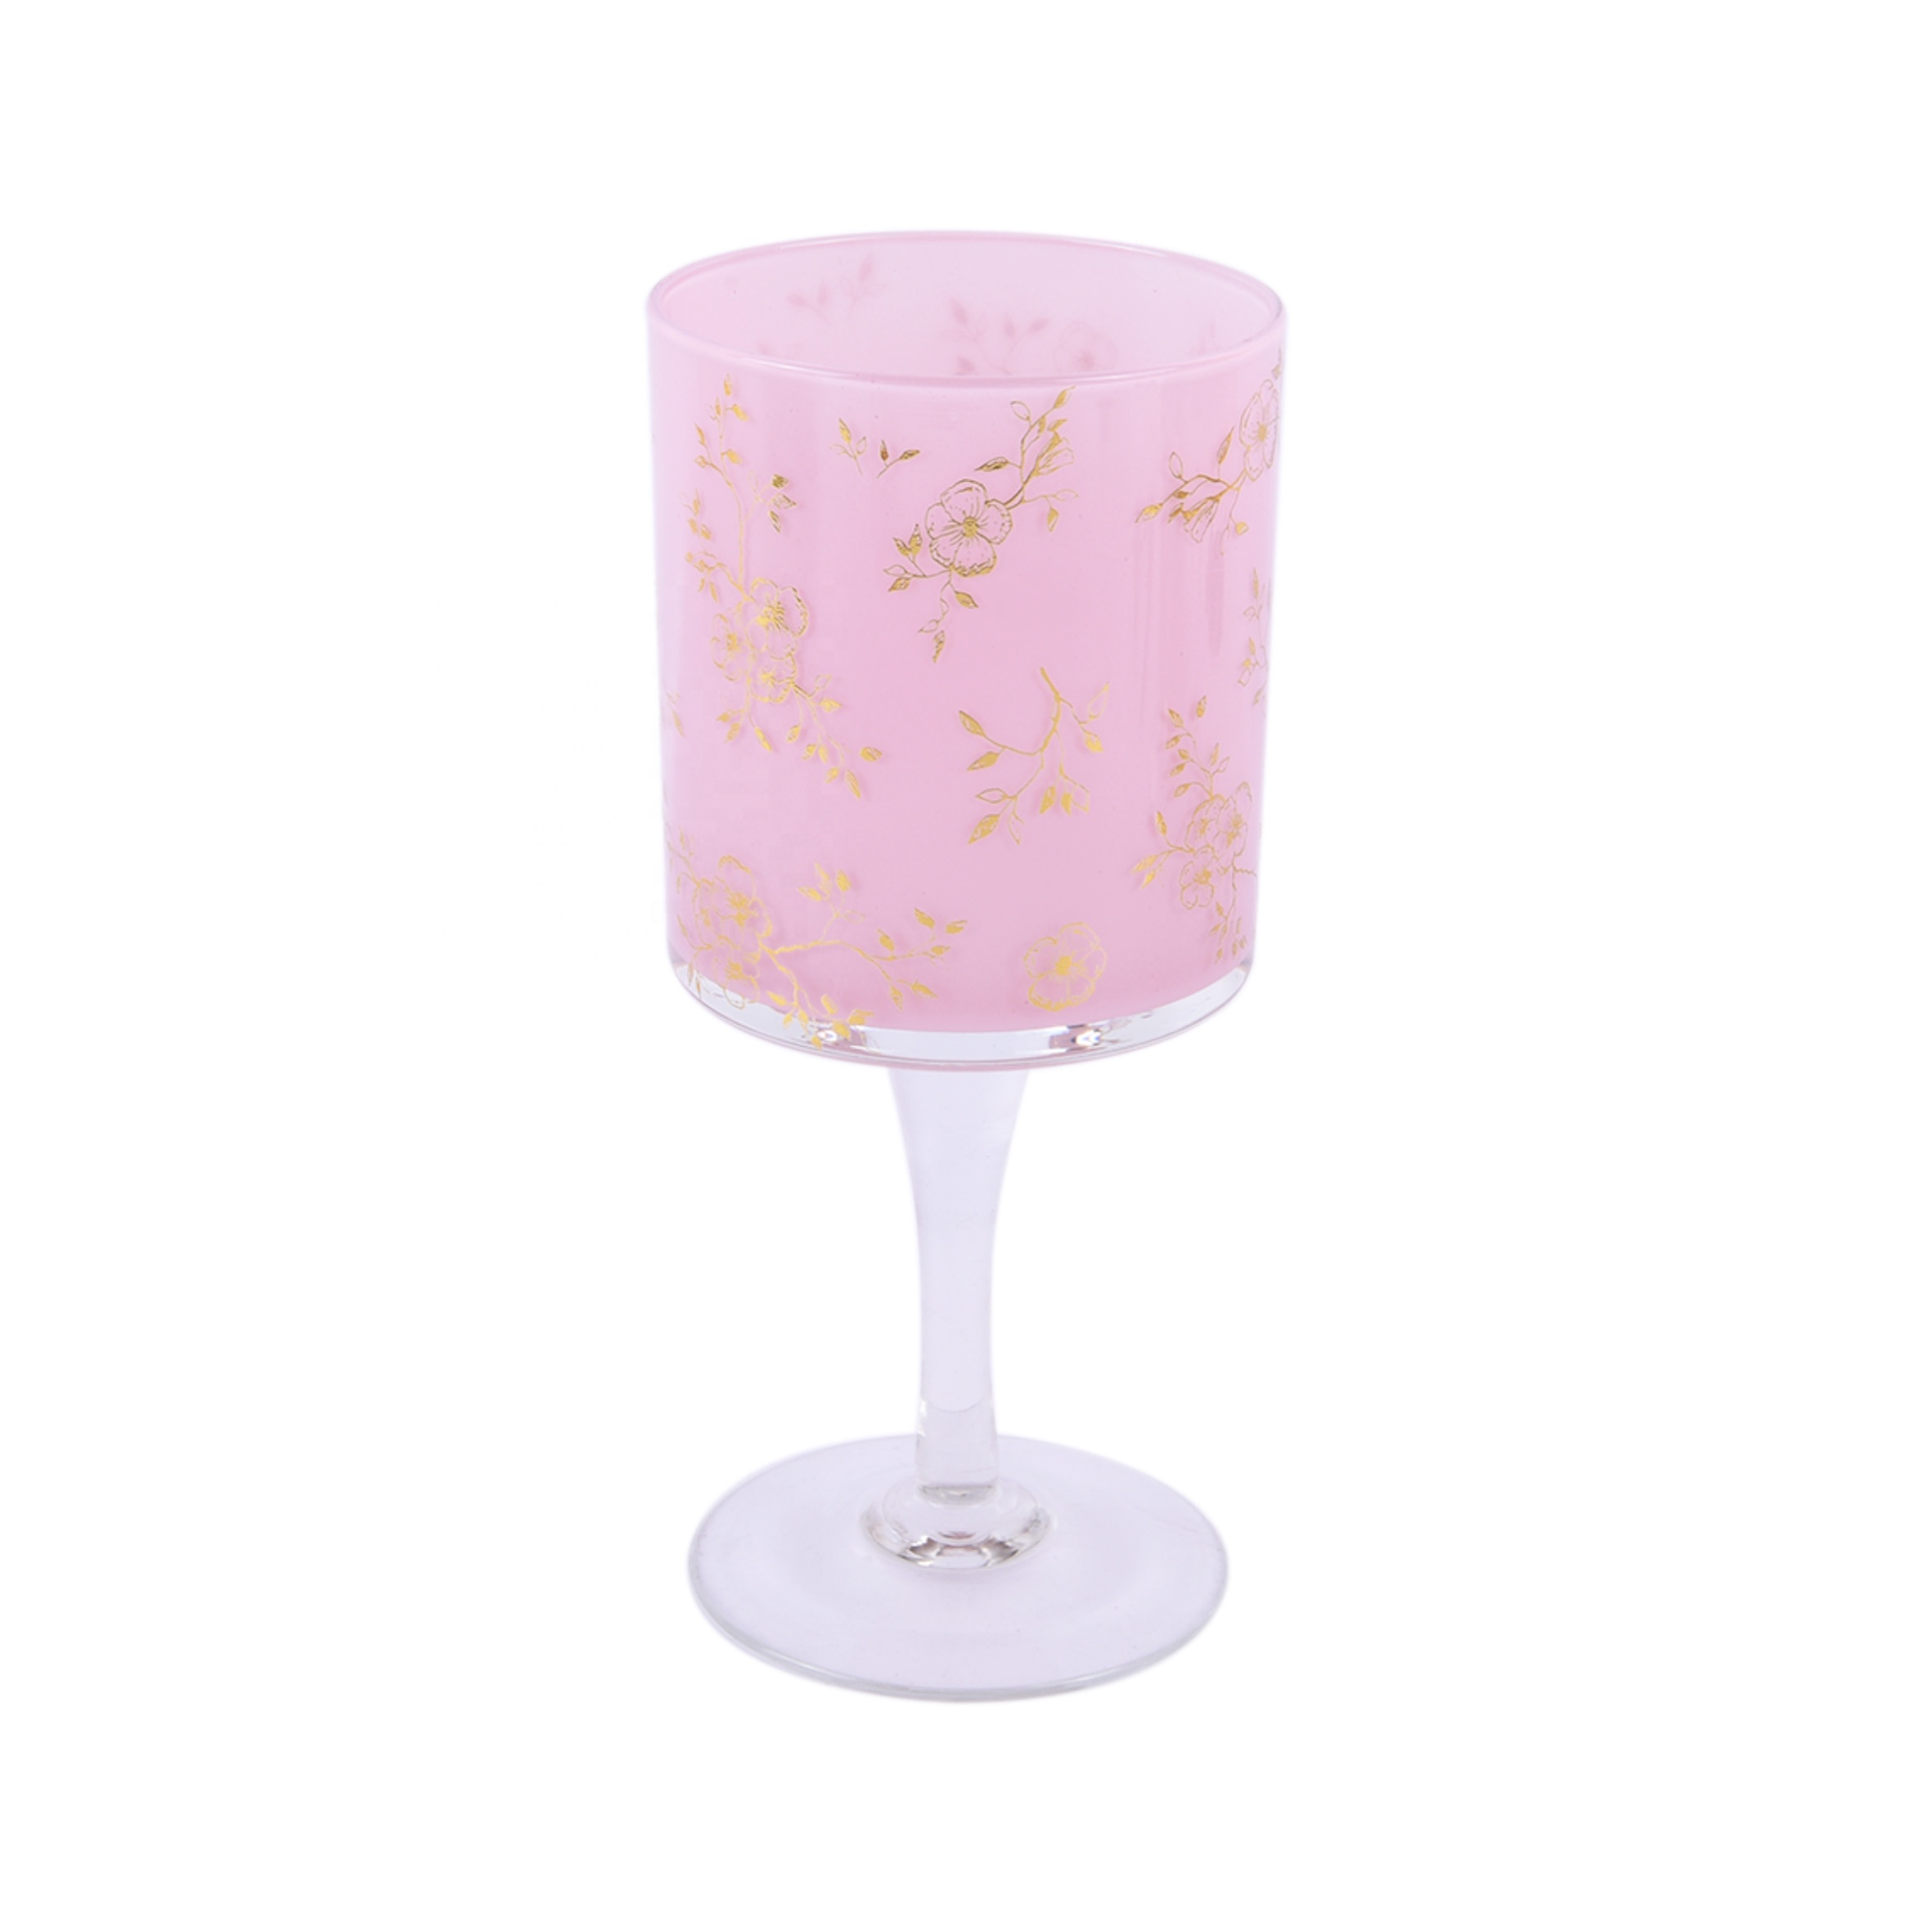 pink glass candlestick holders accent decor